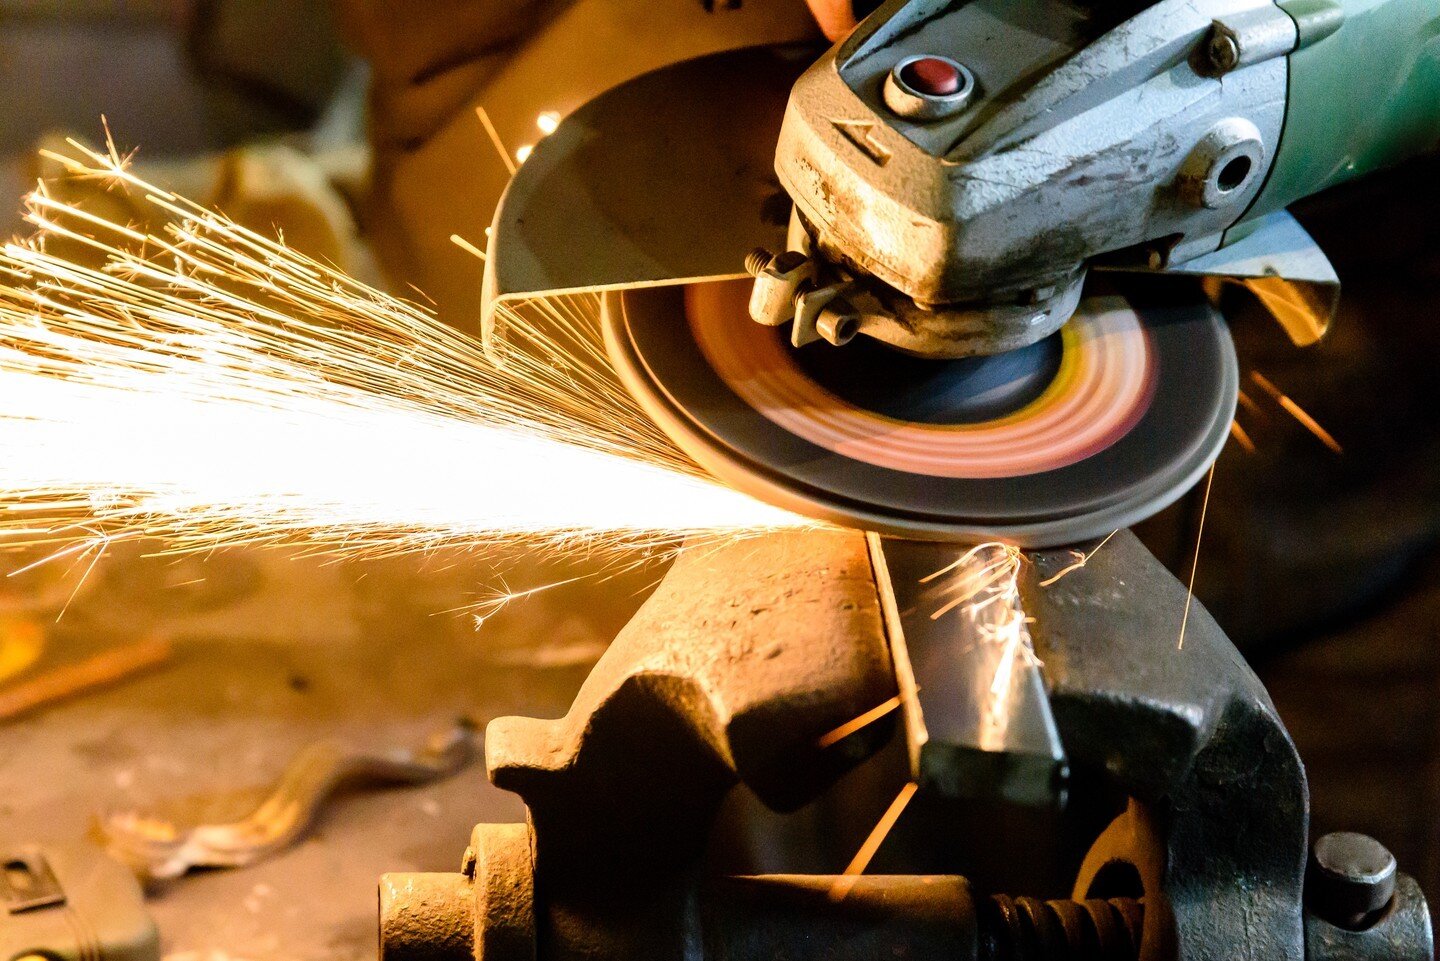 CLASS TODAY 5/21 | Membership NOT REQUIRED
Register:https://www.maker-works.com/current-classes

Metal Shop: Metal Abrasives
2:30 PM